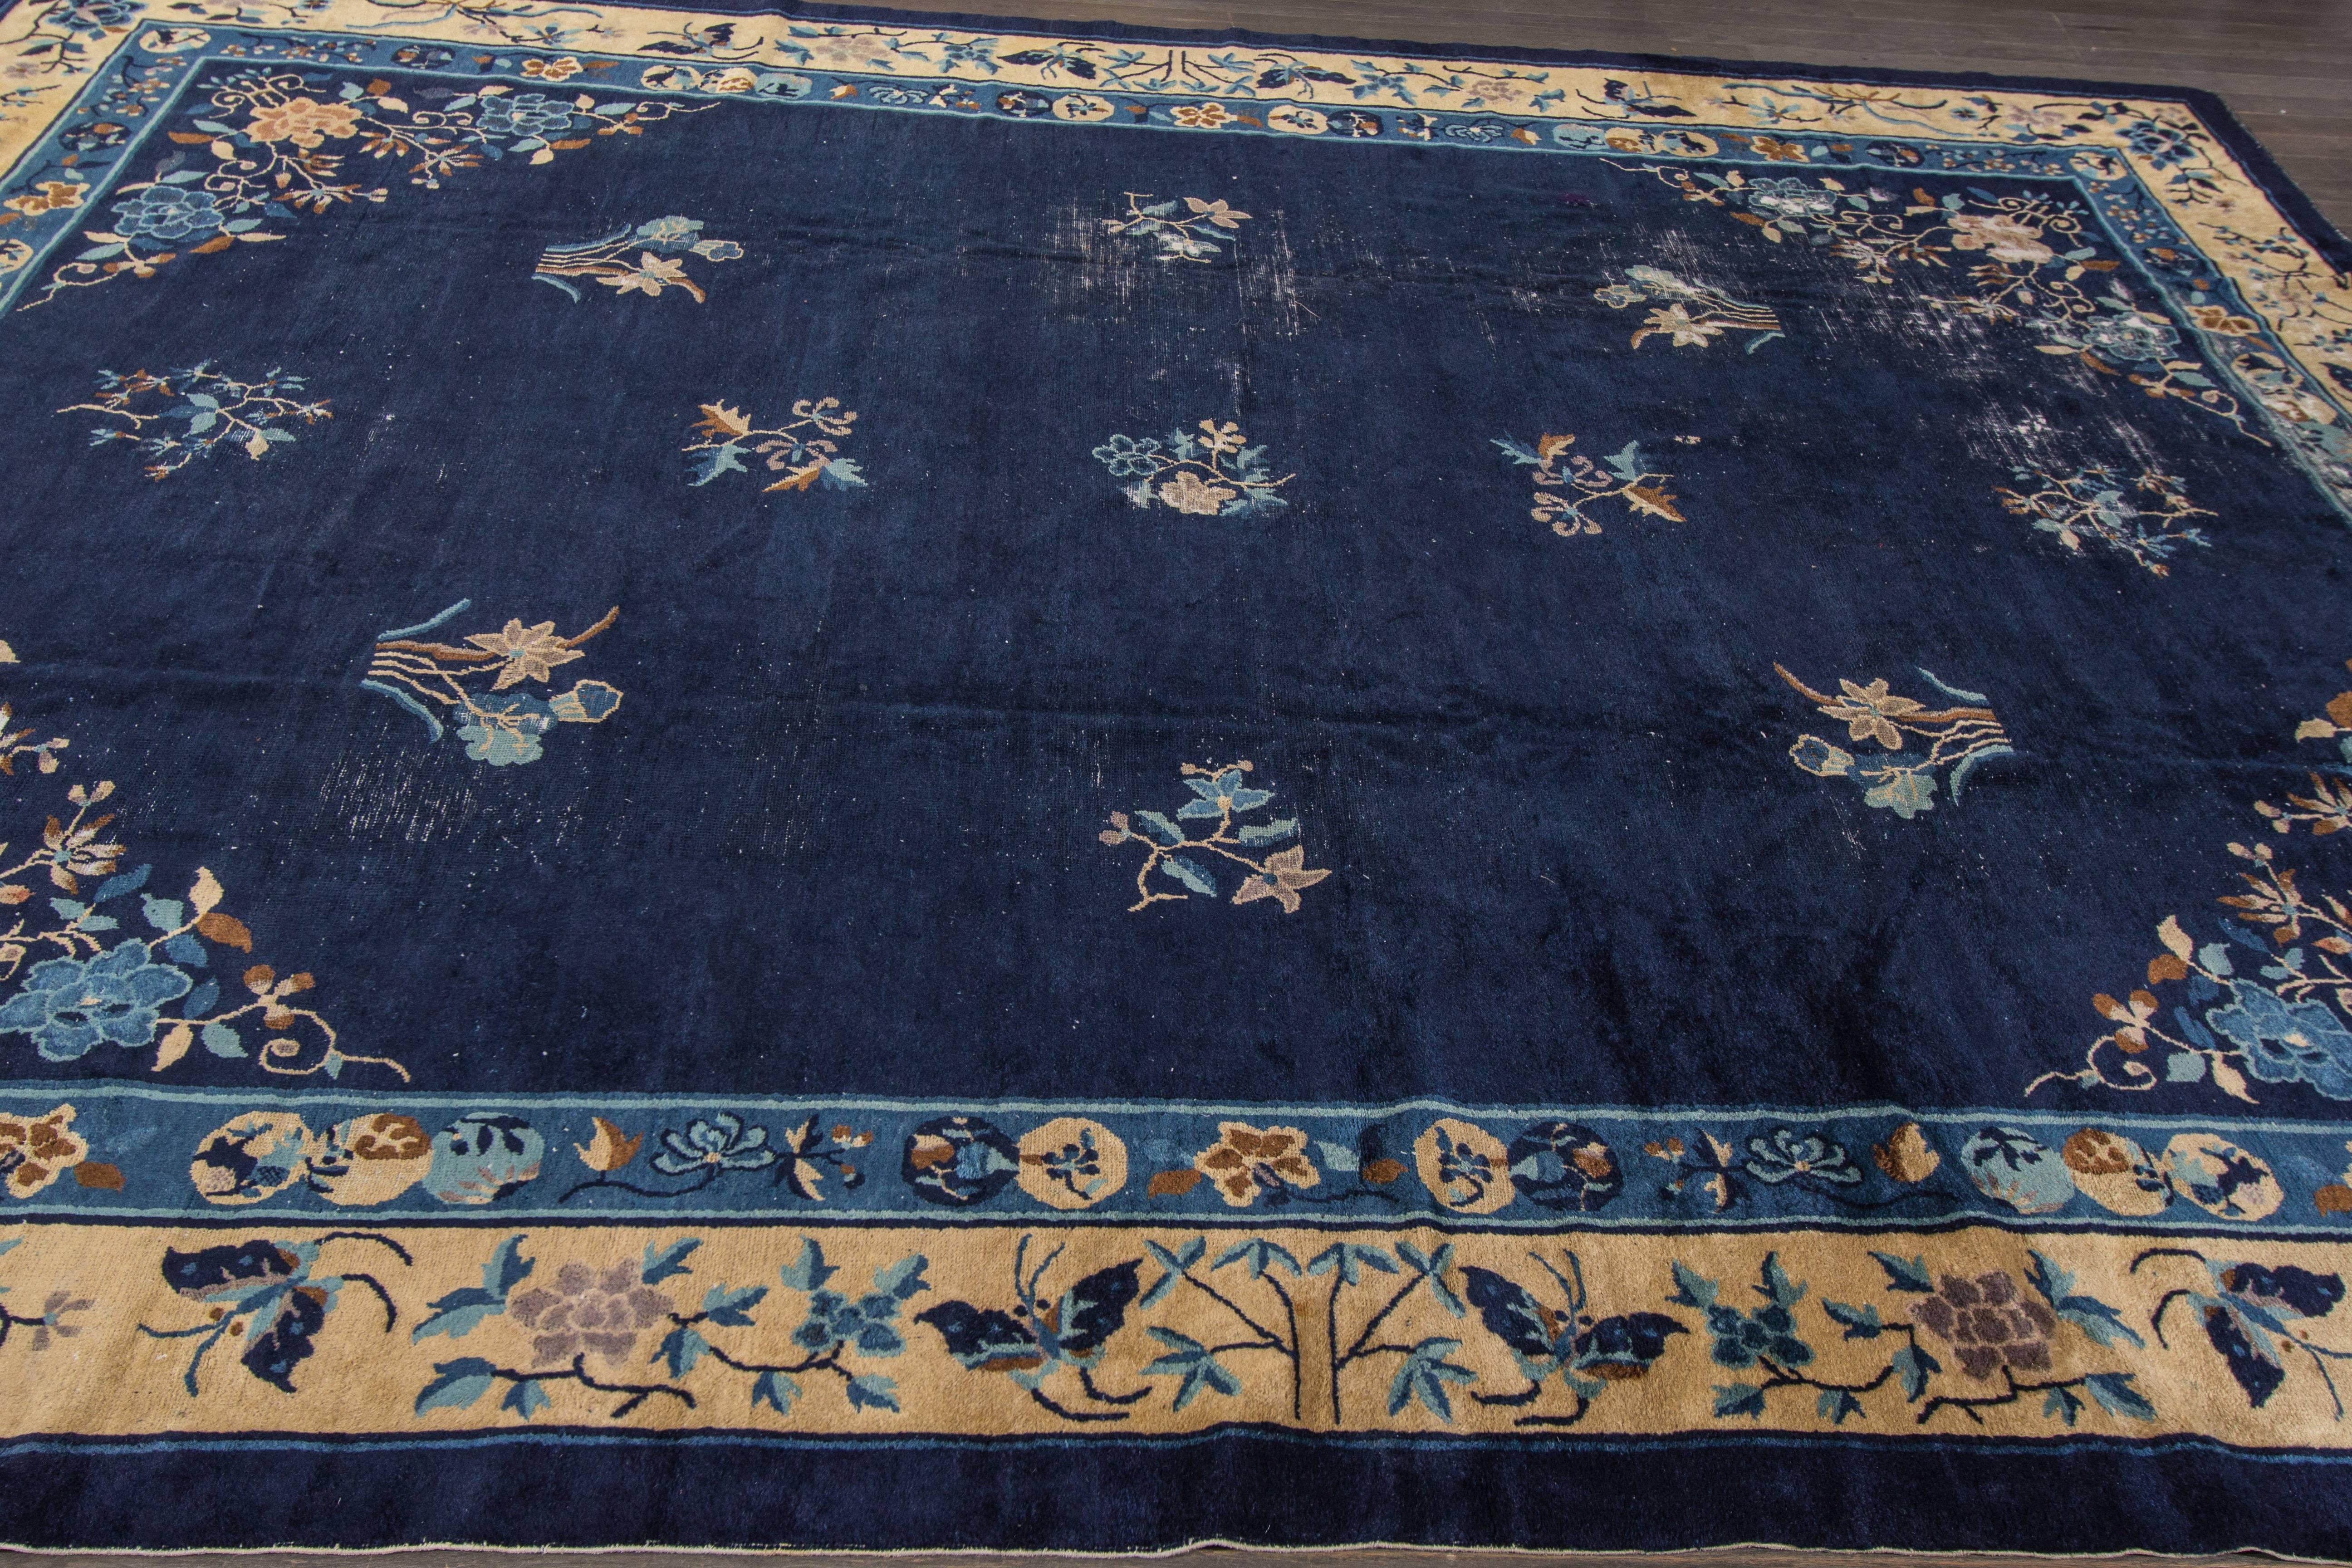 A hand-knotted Peking rug with a floral design on a blue field. Accents of beige, brown and red throughout the piece. This rug measures 8'.2 x 11'.6.